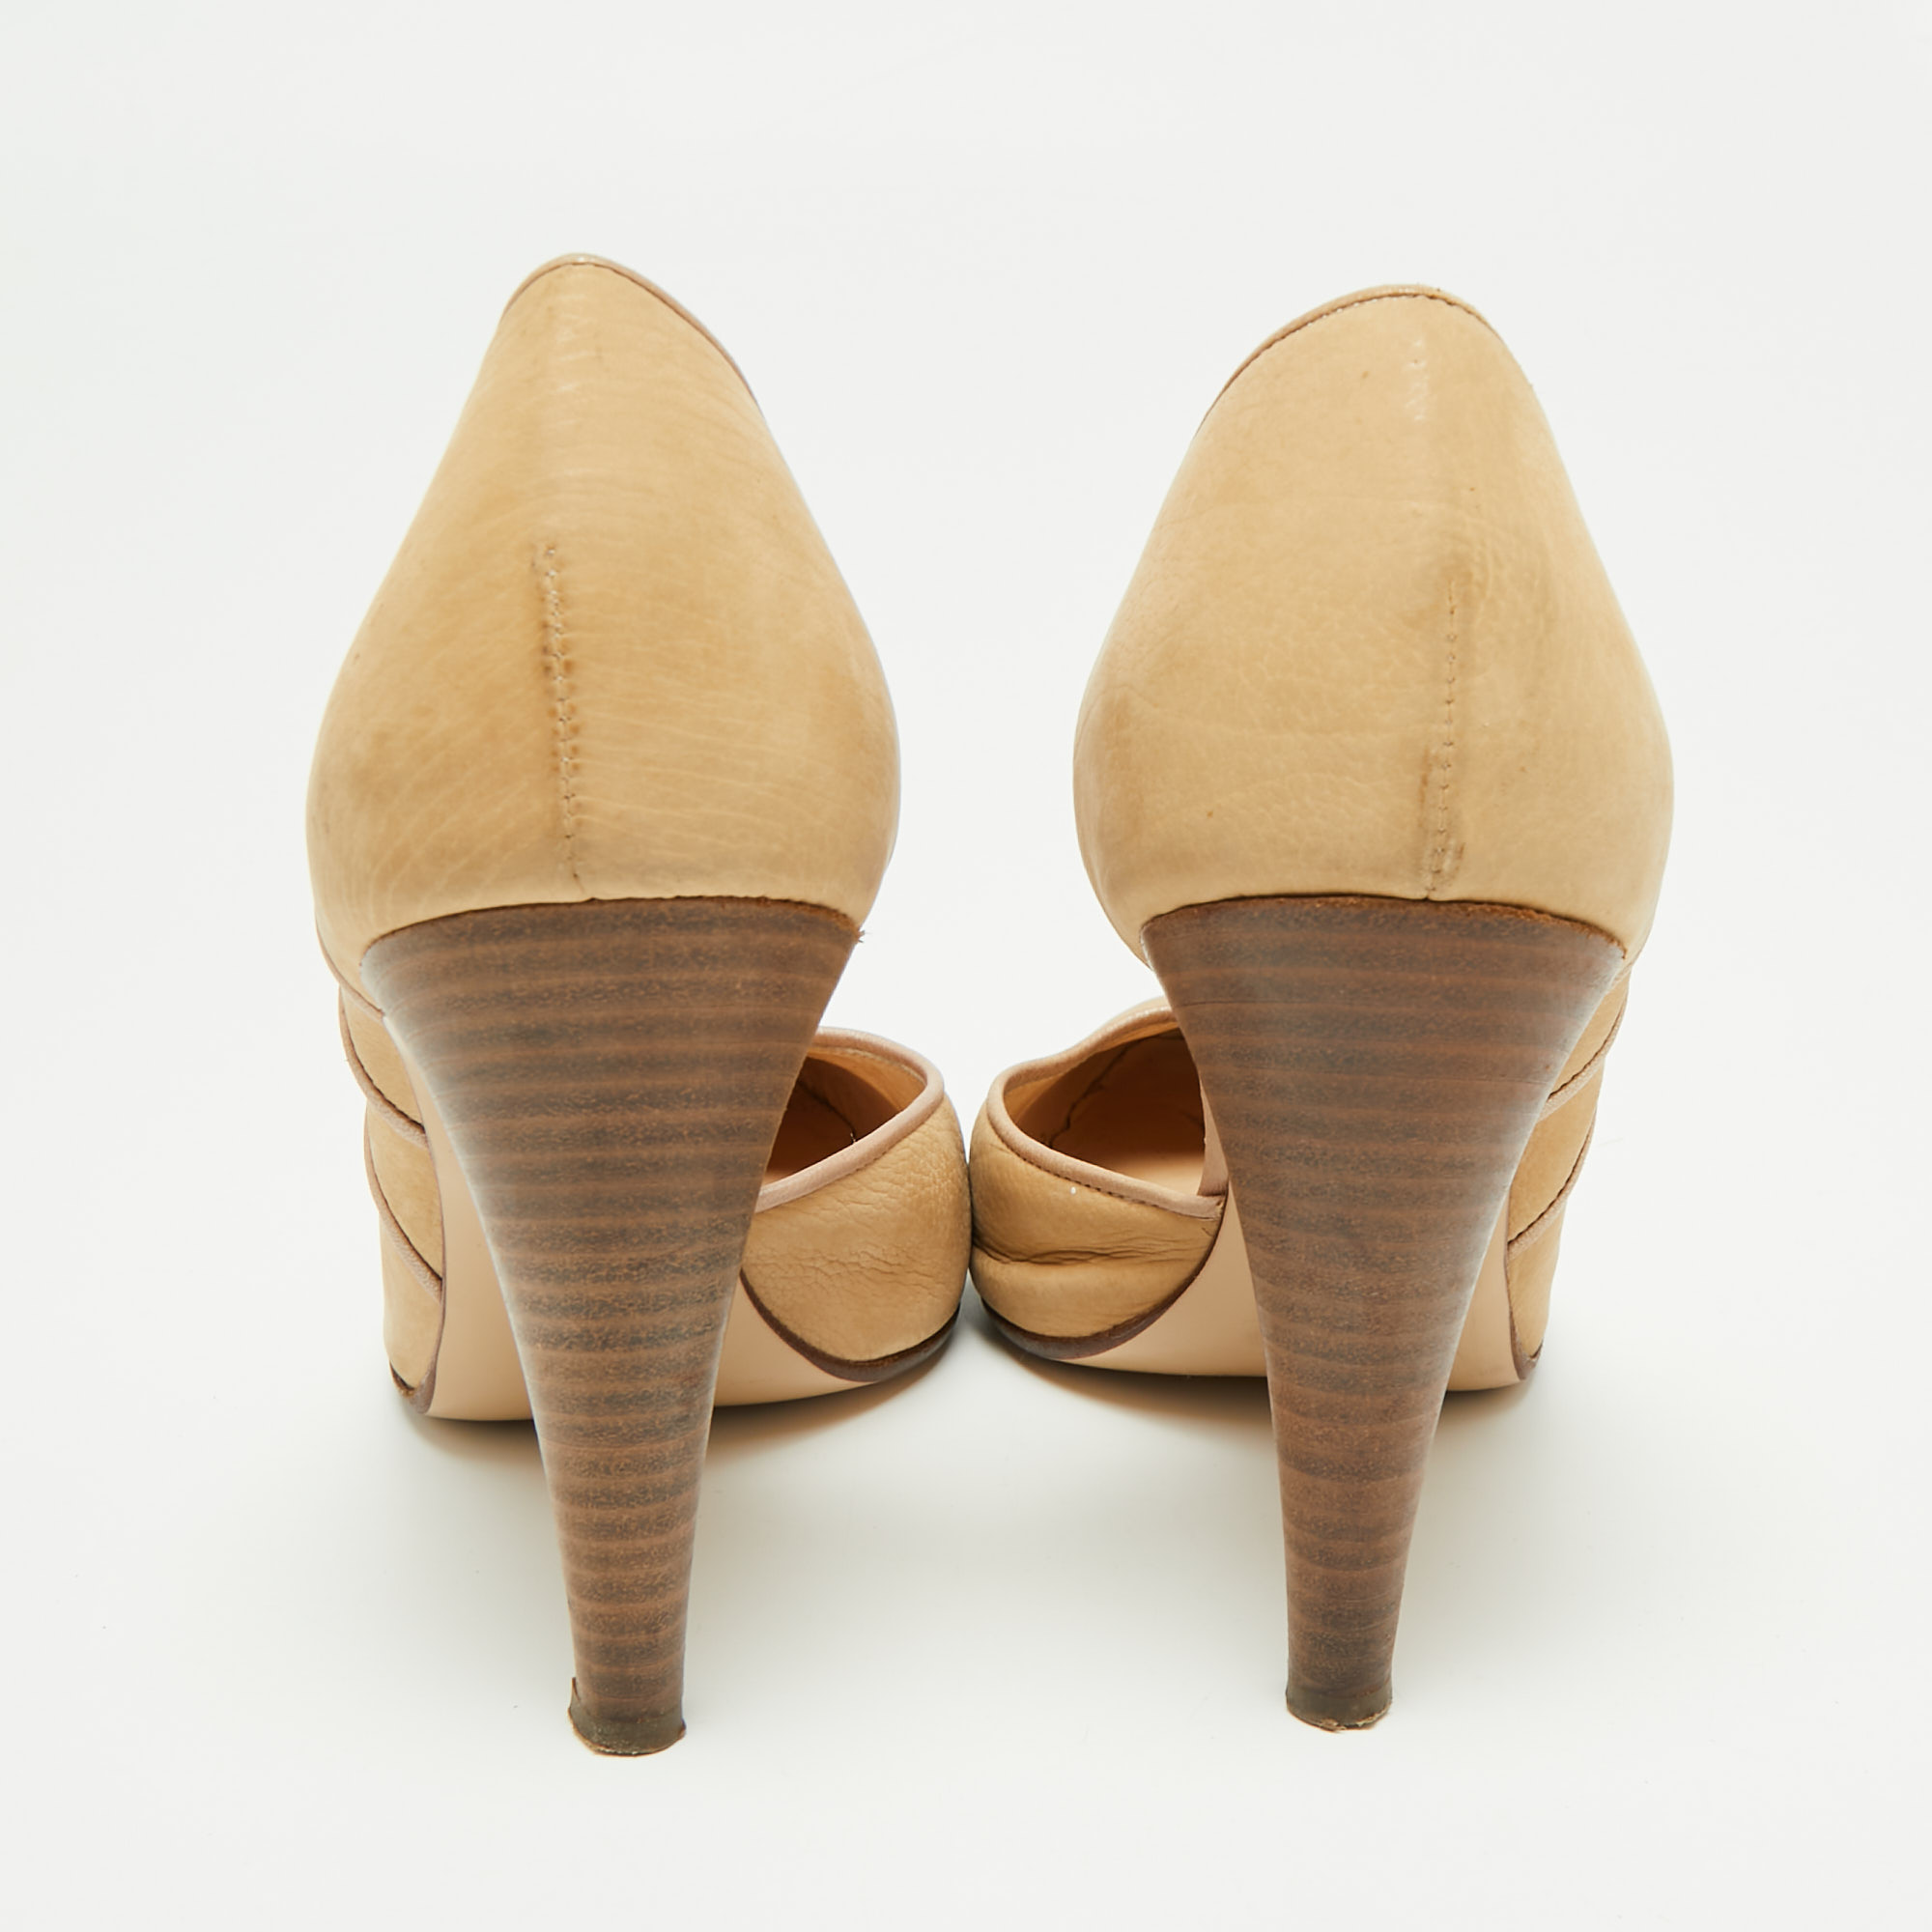 Bally Light Brown Nubuck Leather D'orsay Pointed Toe Pumps Size 39.5